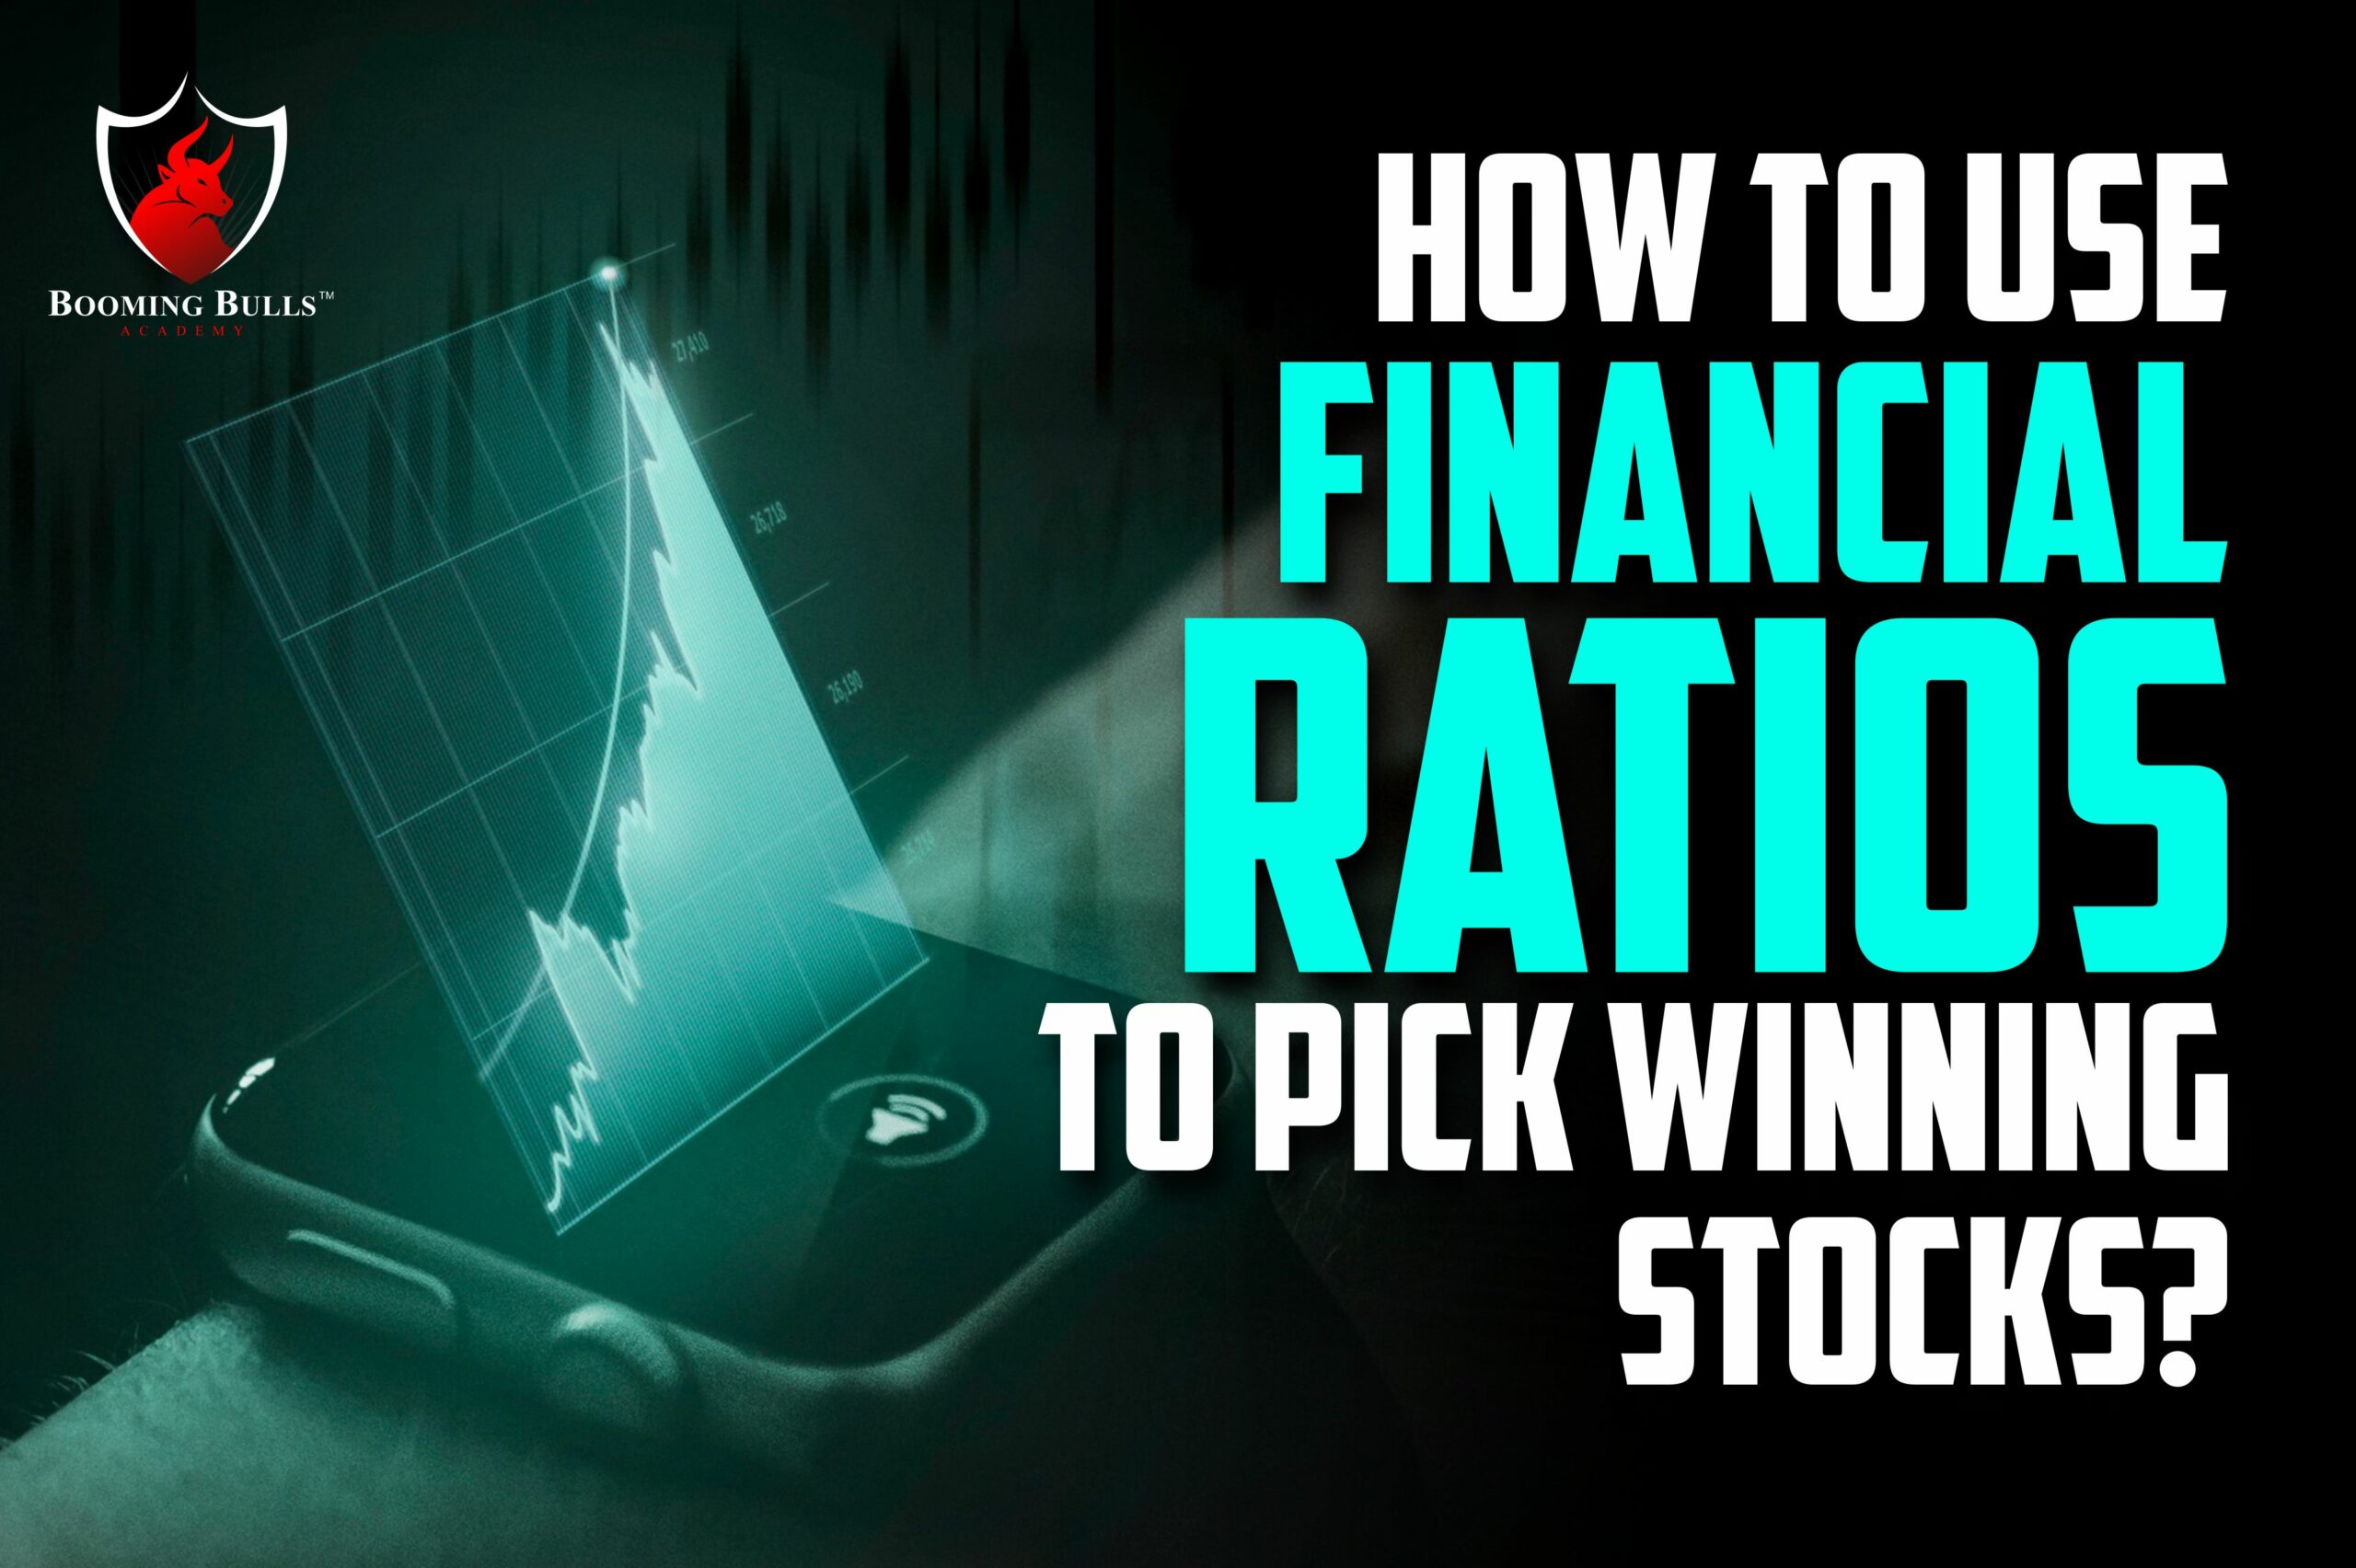 How to Use Financial Ratios to Pick Winning Stocks